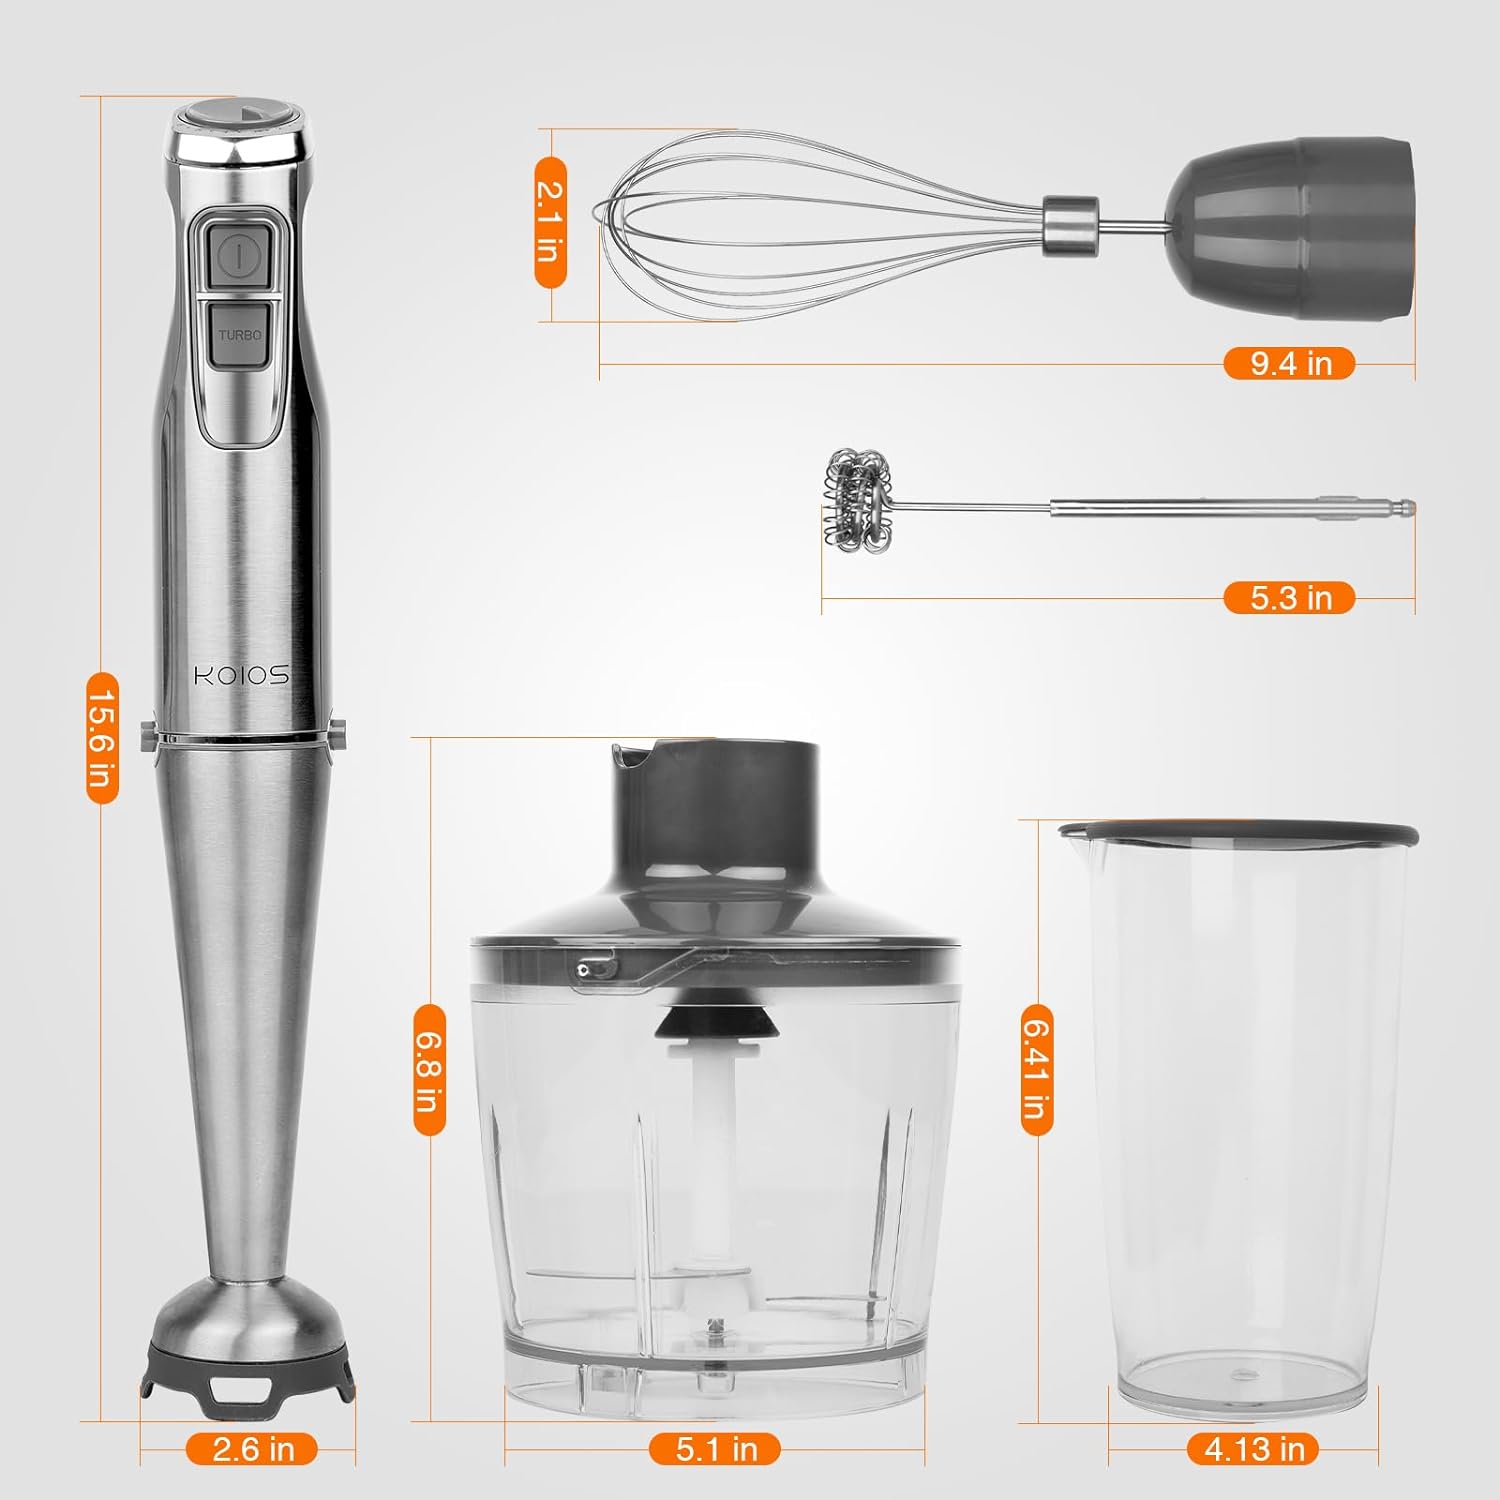 Stainless Steel Stick Blender Review